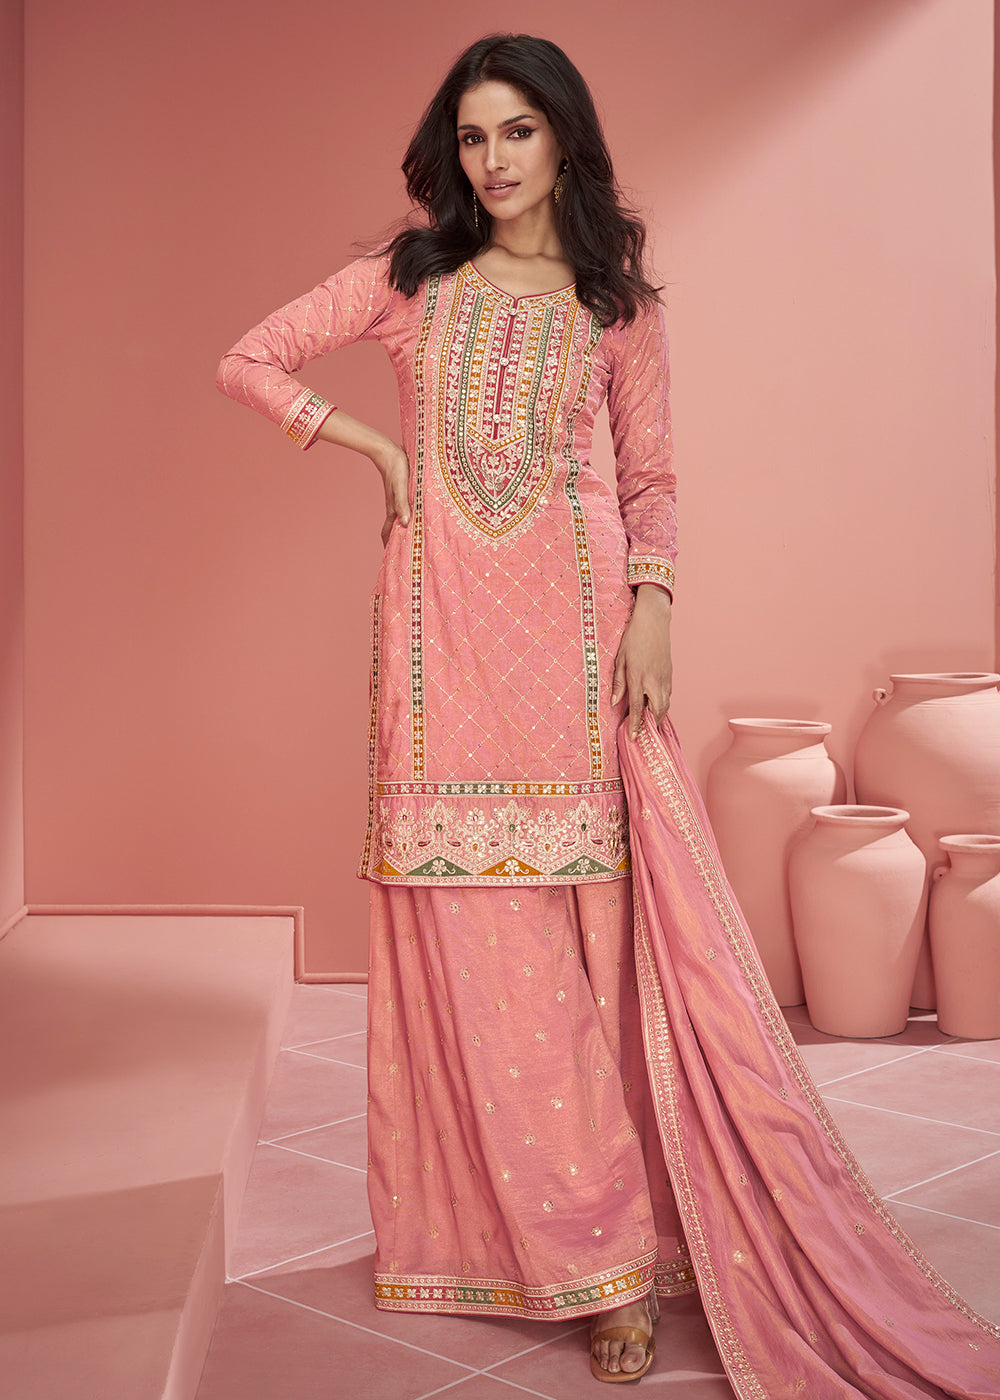 Buy Now Organza Silk Coral Pink Embroidered Designer Palazzo Suit Online in USA, UK, Canada, Germany, Australia & Worldwide at Empress Clothing.